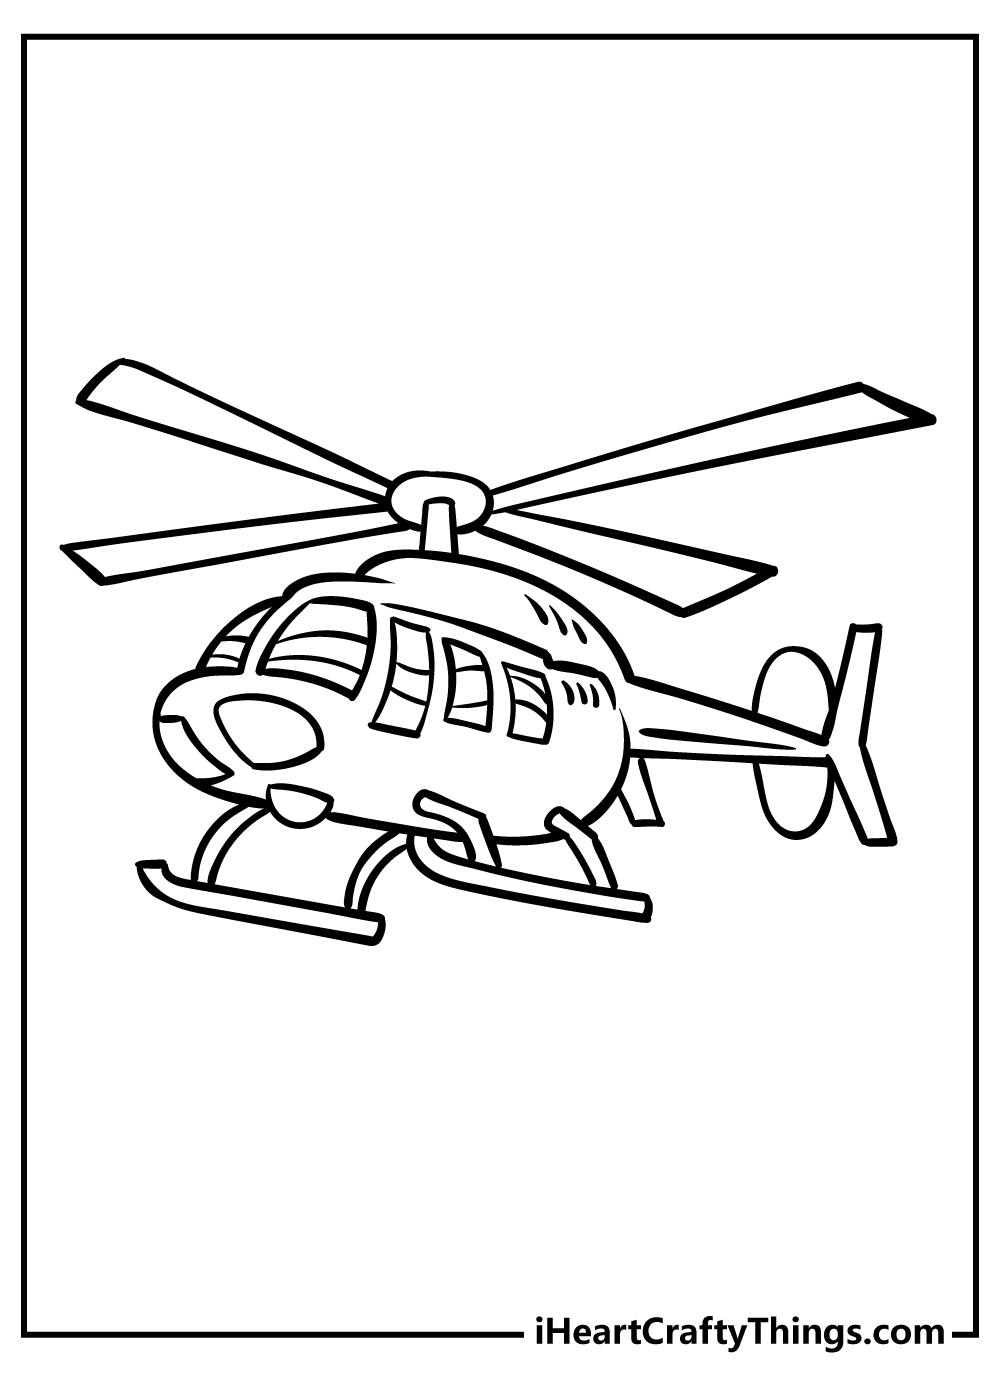 Helicopter Coloring Book free printable